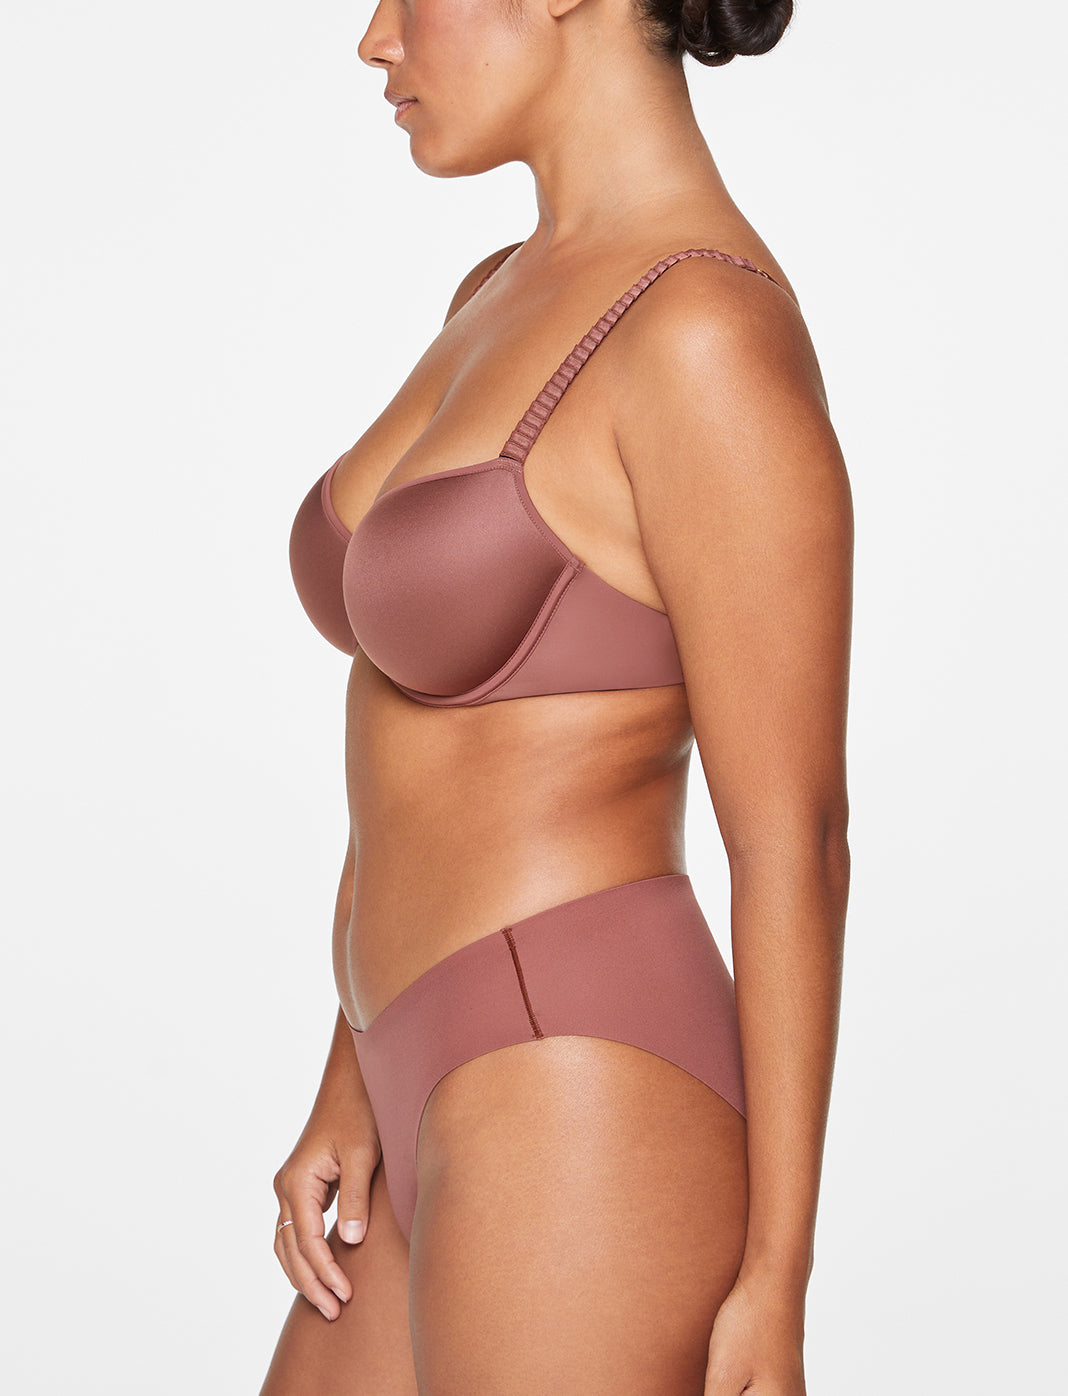 Thirdlove 24/7 Classic T Shirt Bra Deep Espresso 40D Size undefined - $40 -  From W